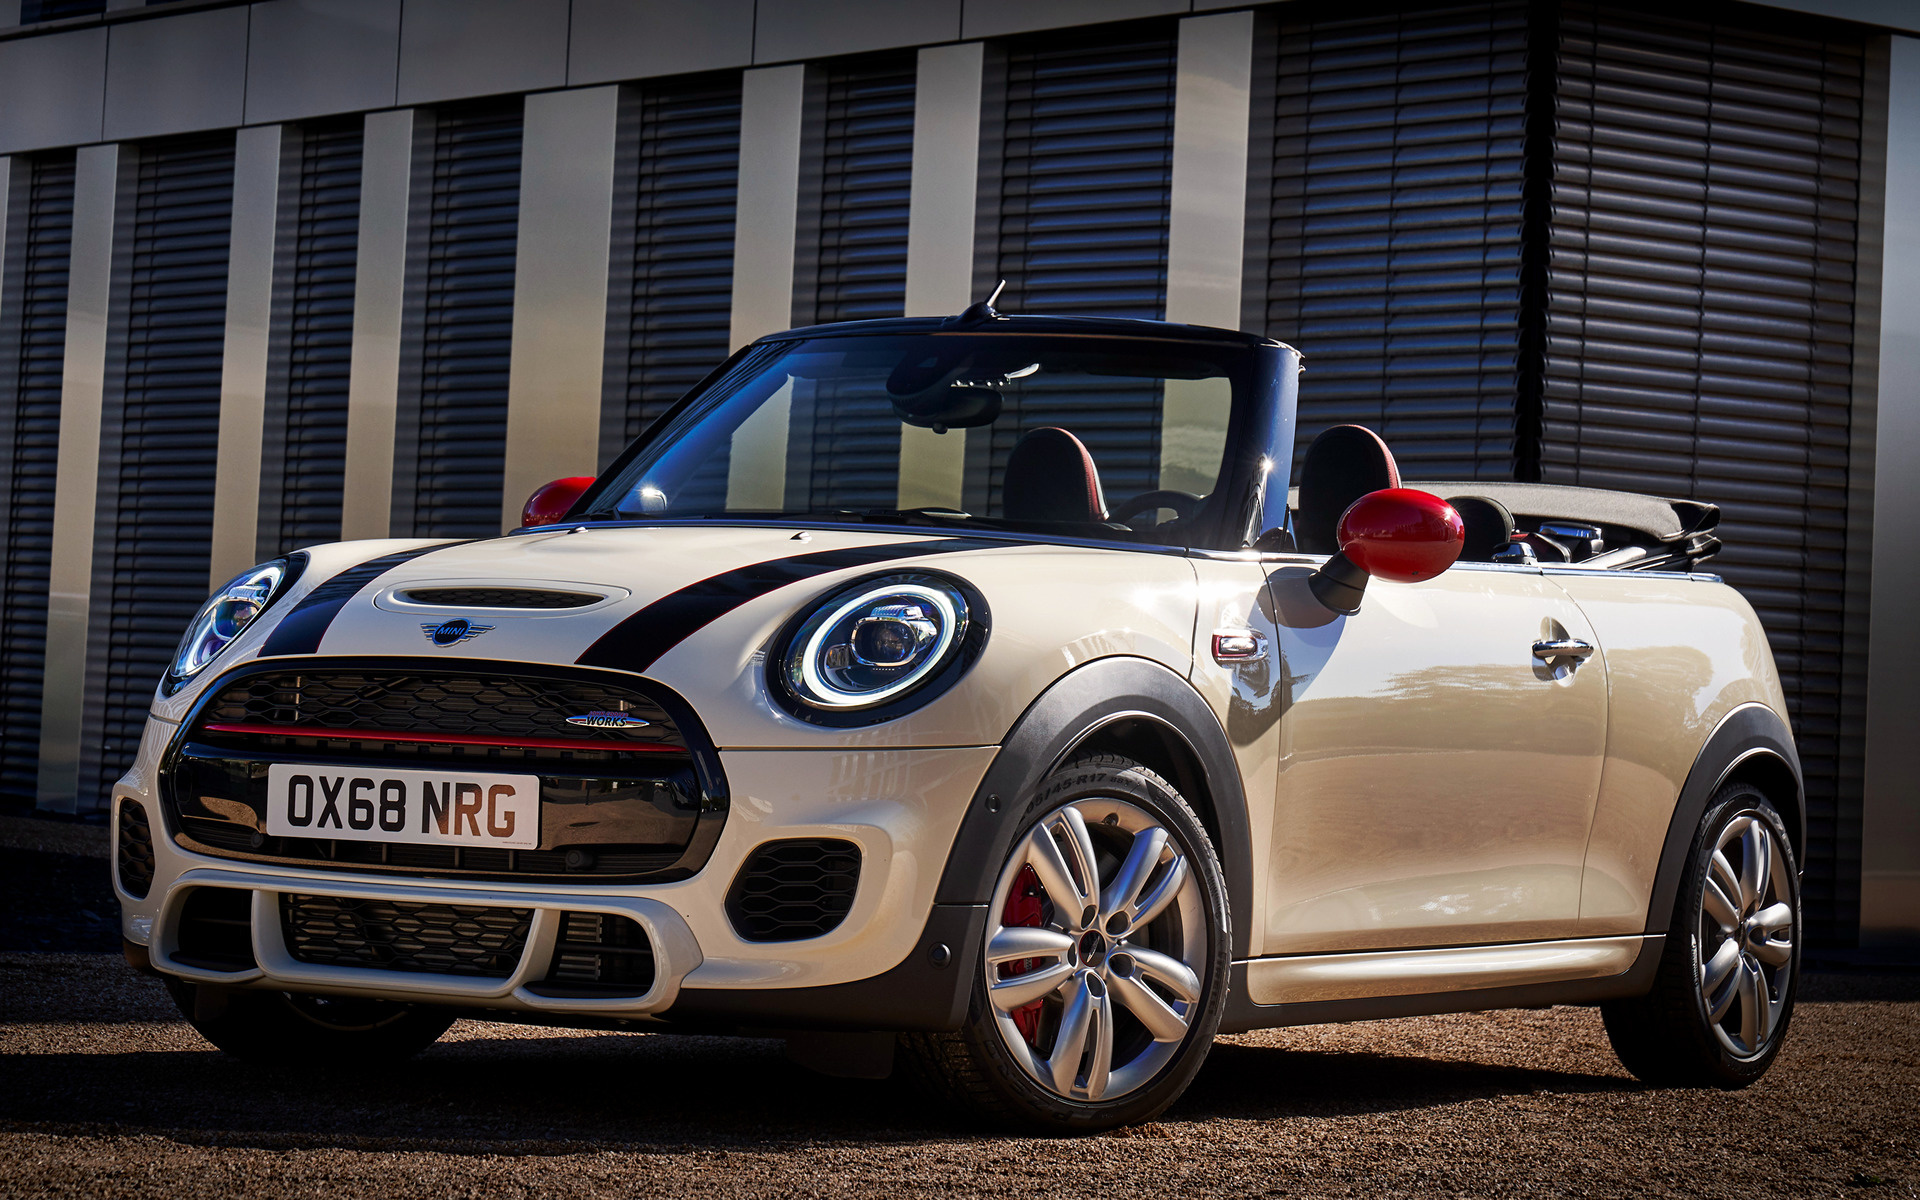 2018 Mini John Cooper Works Cabrio - Wallpapers and HD Images | Car Pixel